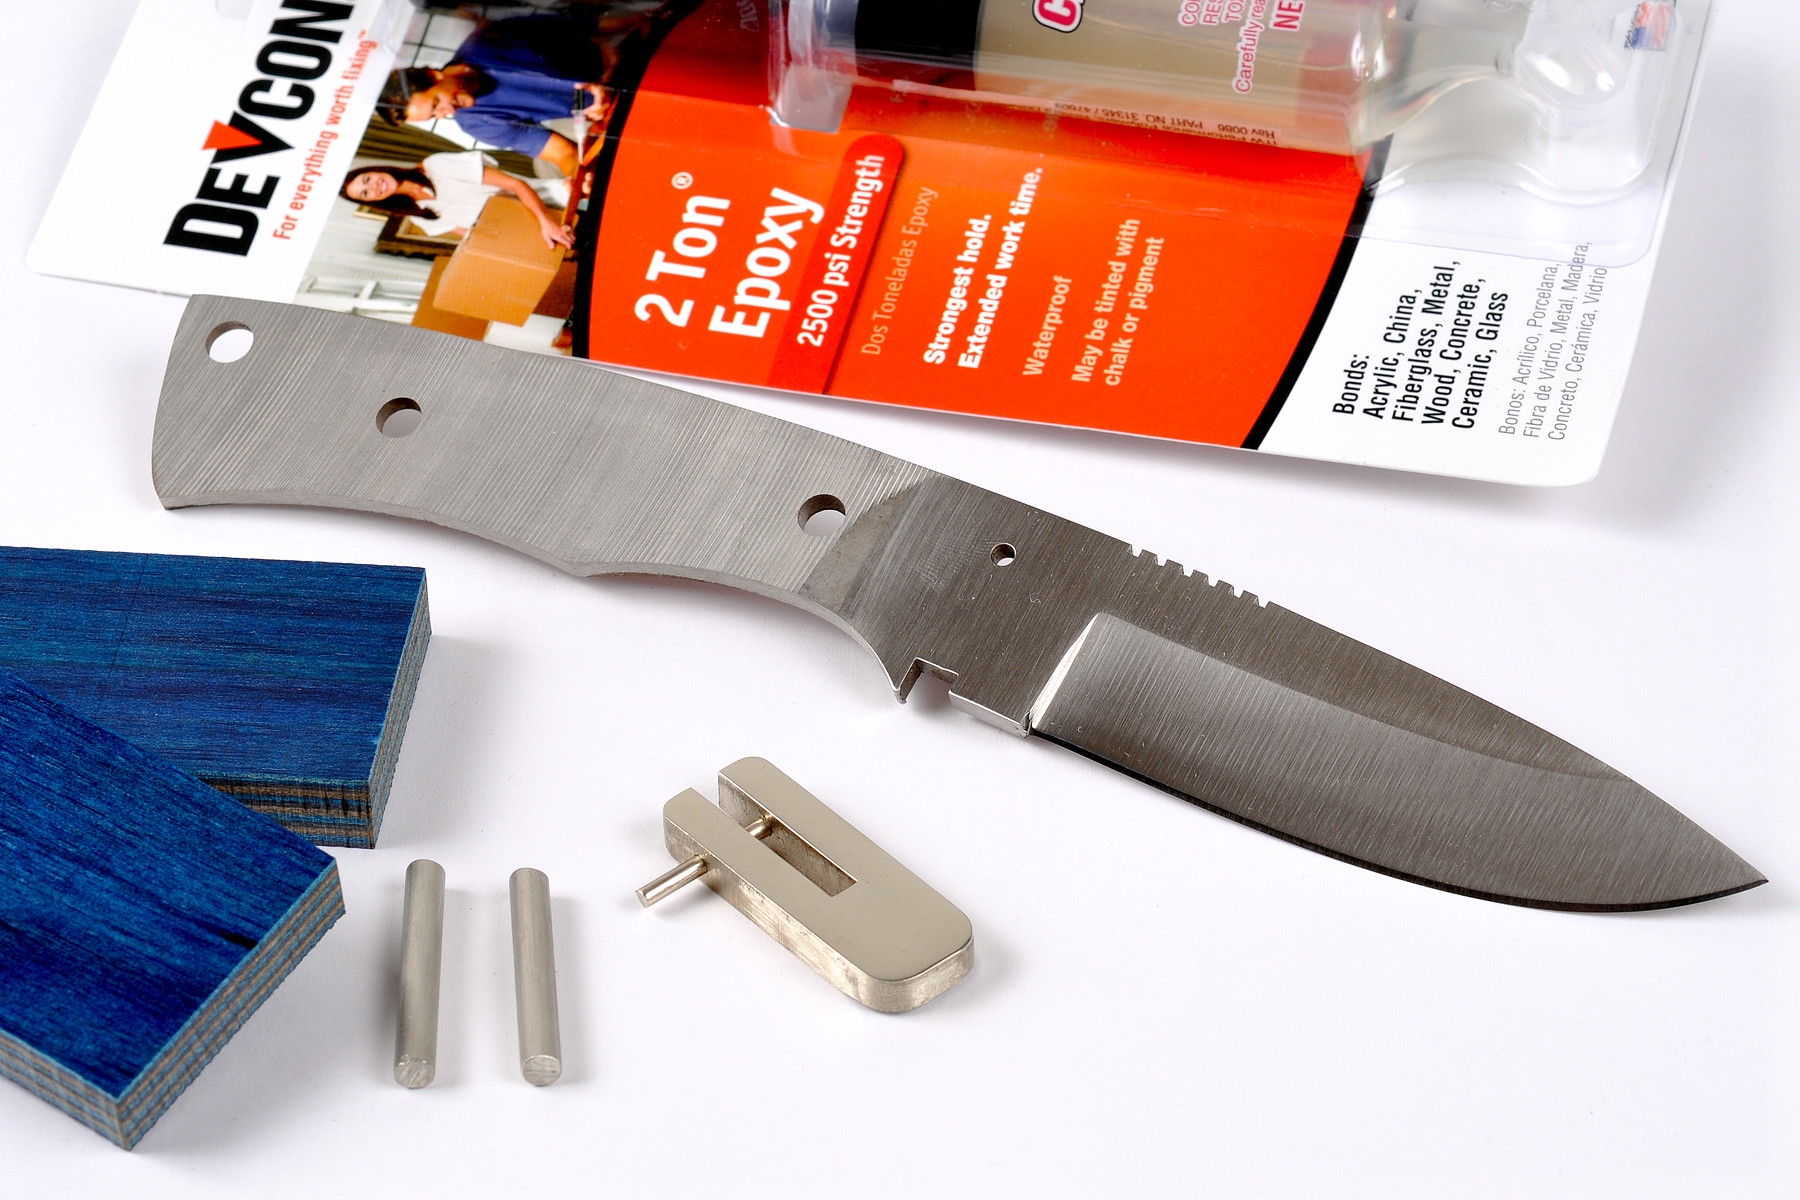 DIY Knife Making Kit
 Build a Knife From The Latest Knife Kits Blade Magazine